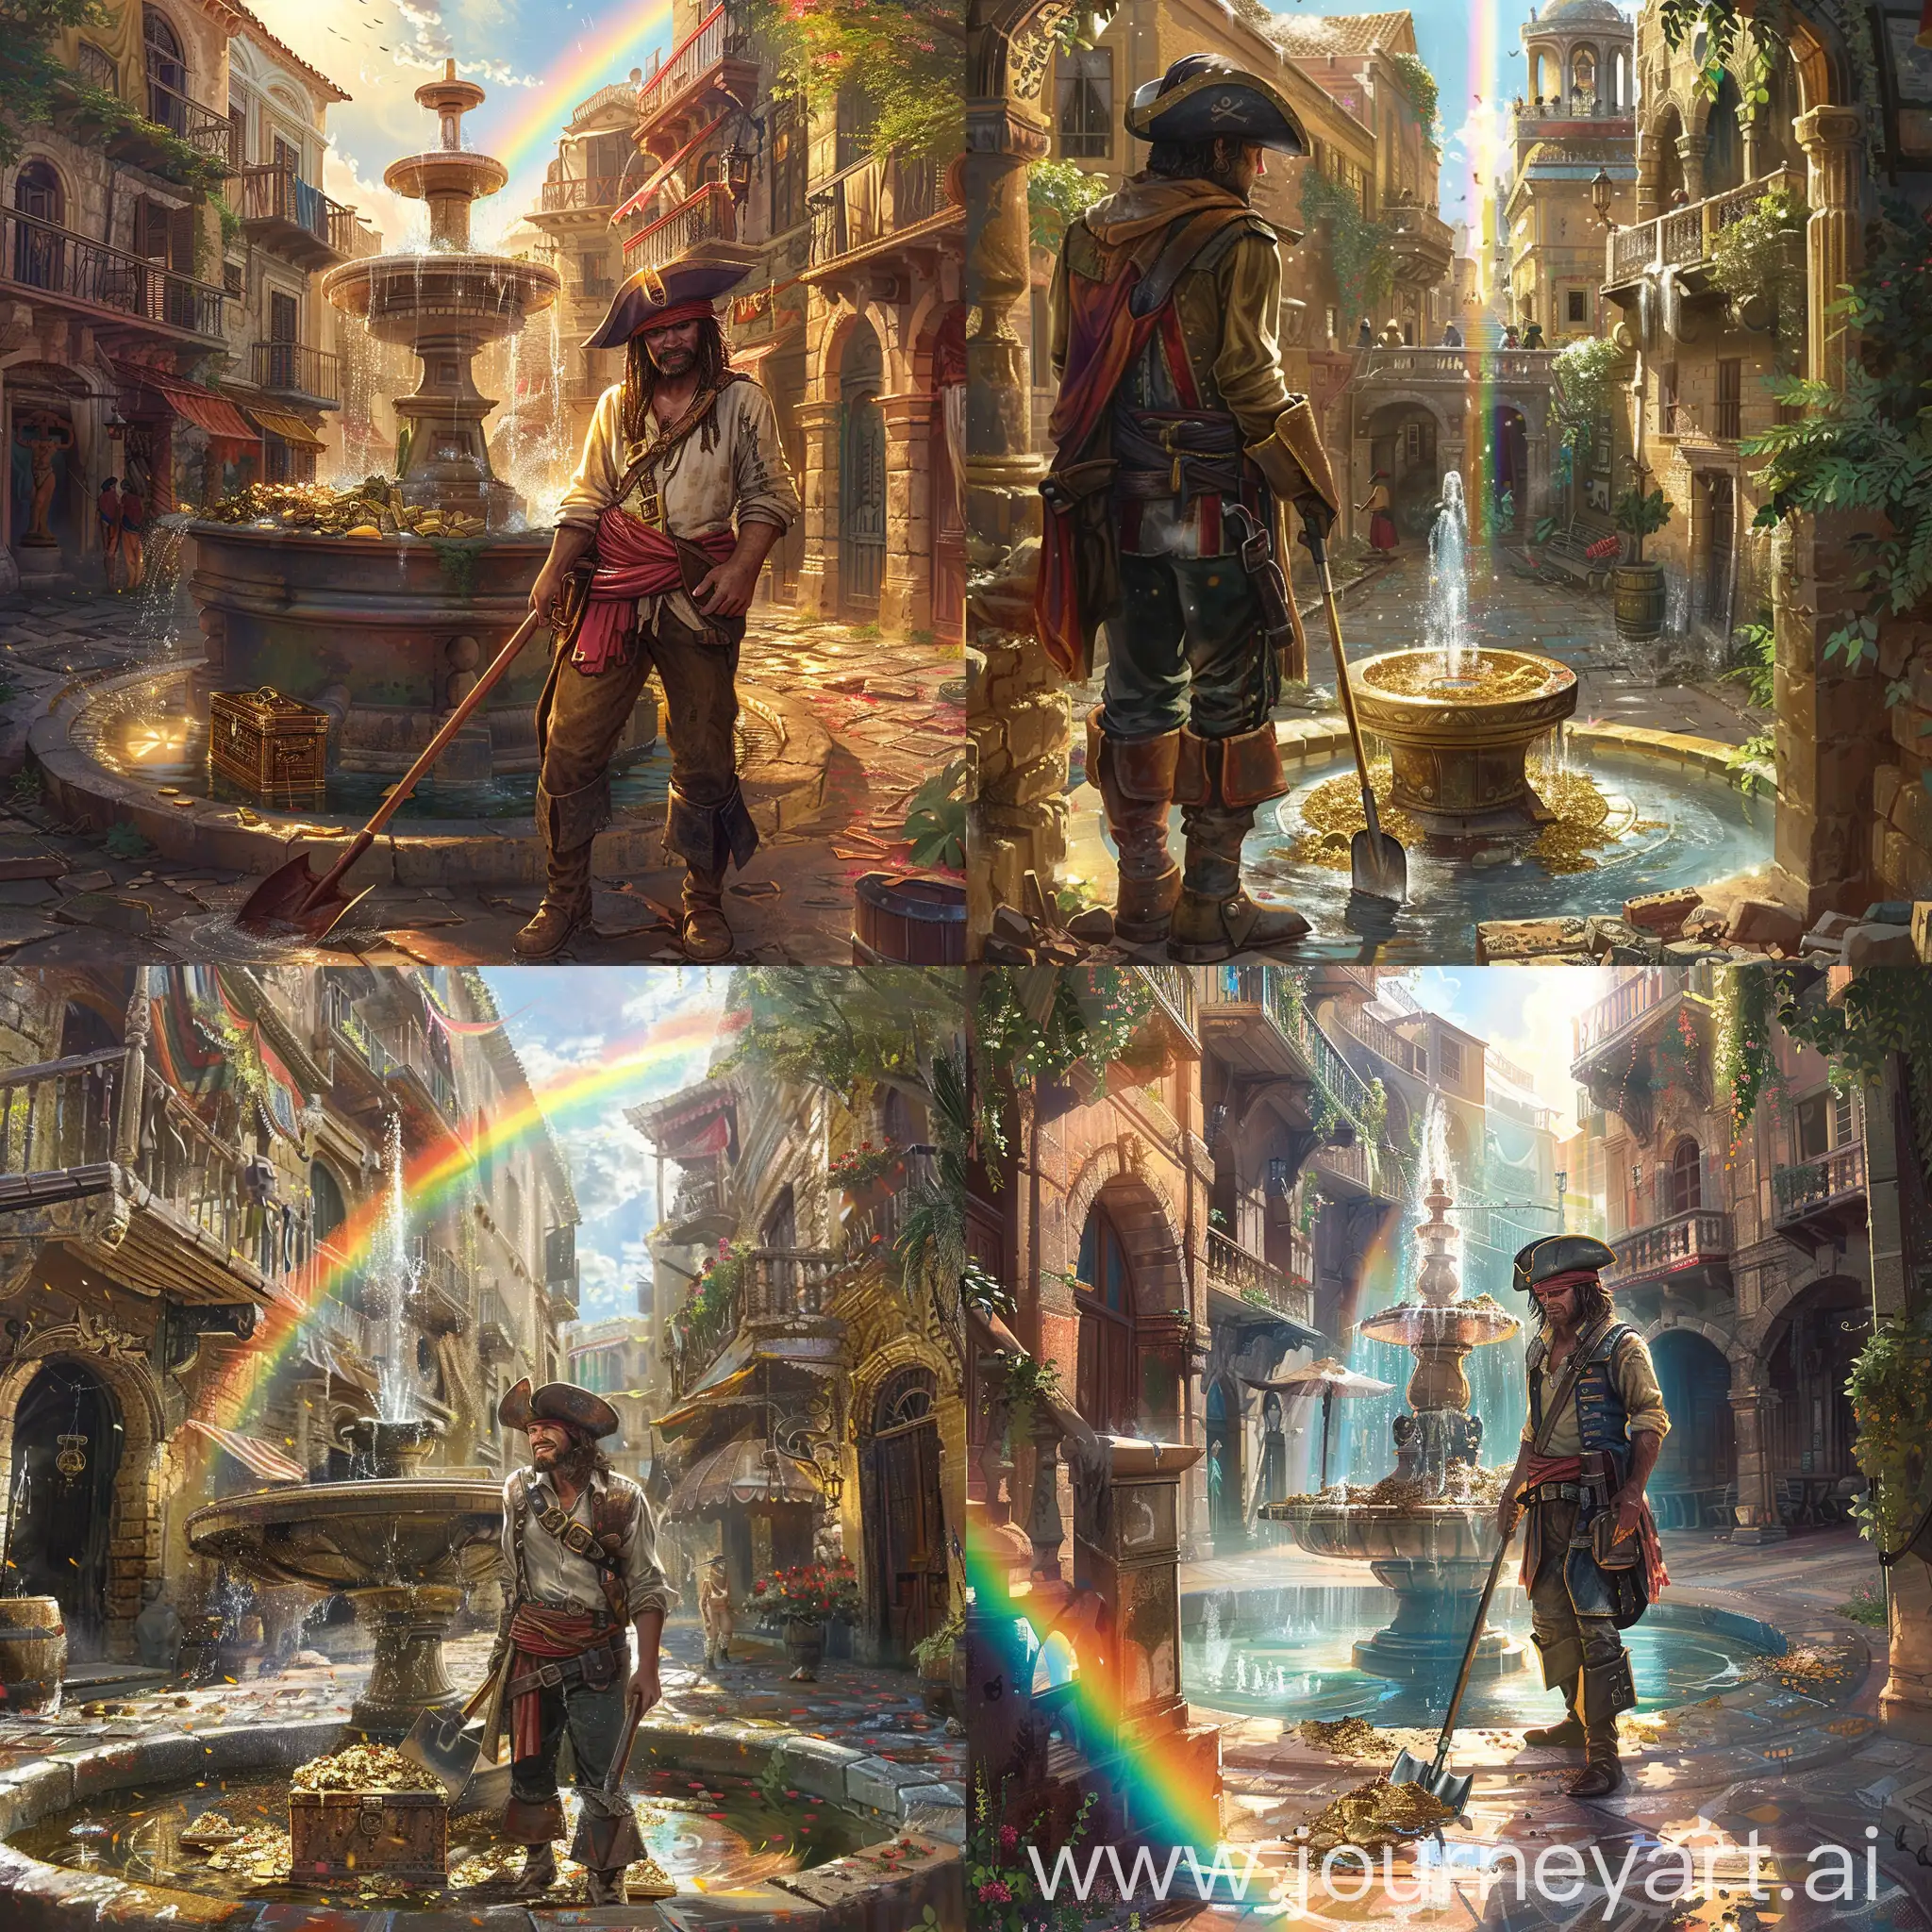 Pirate-Treasure-Discovery-in-Sunlit-City-with-Rainbow